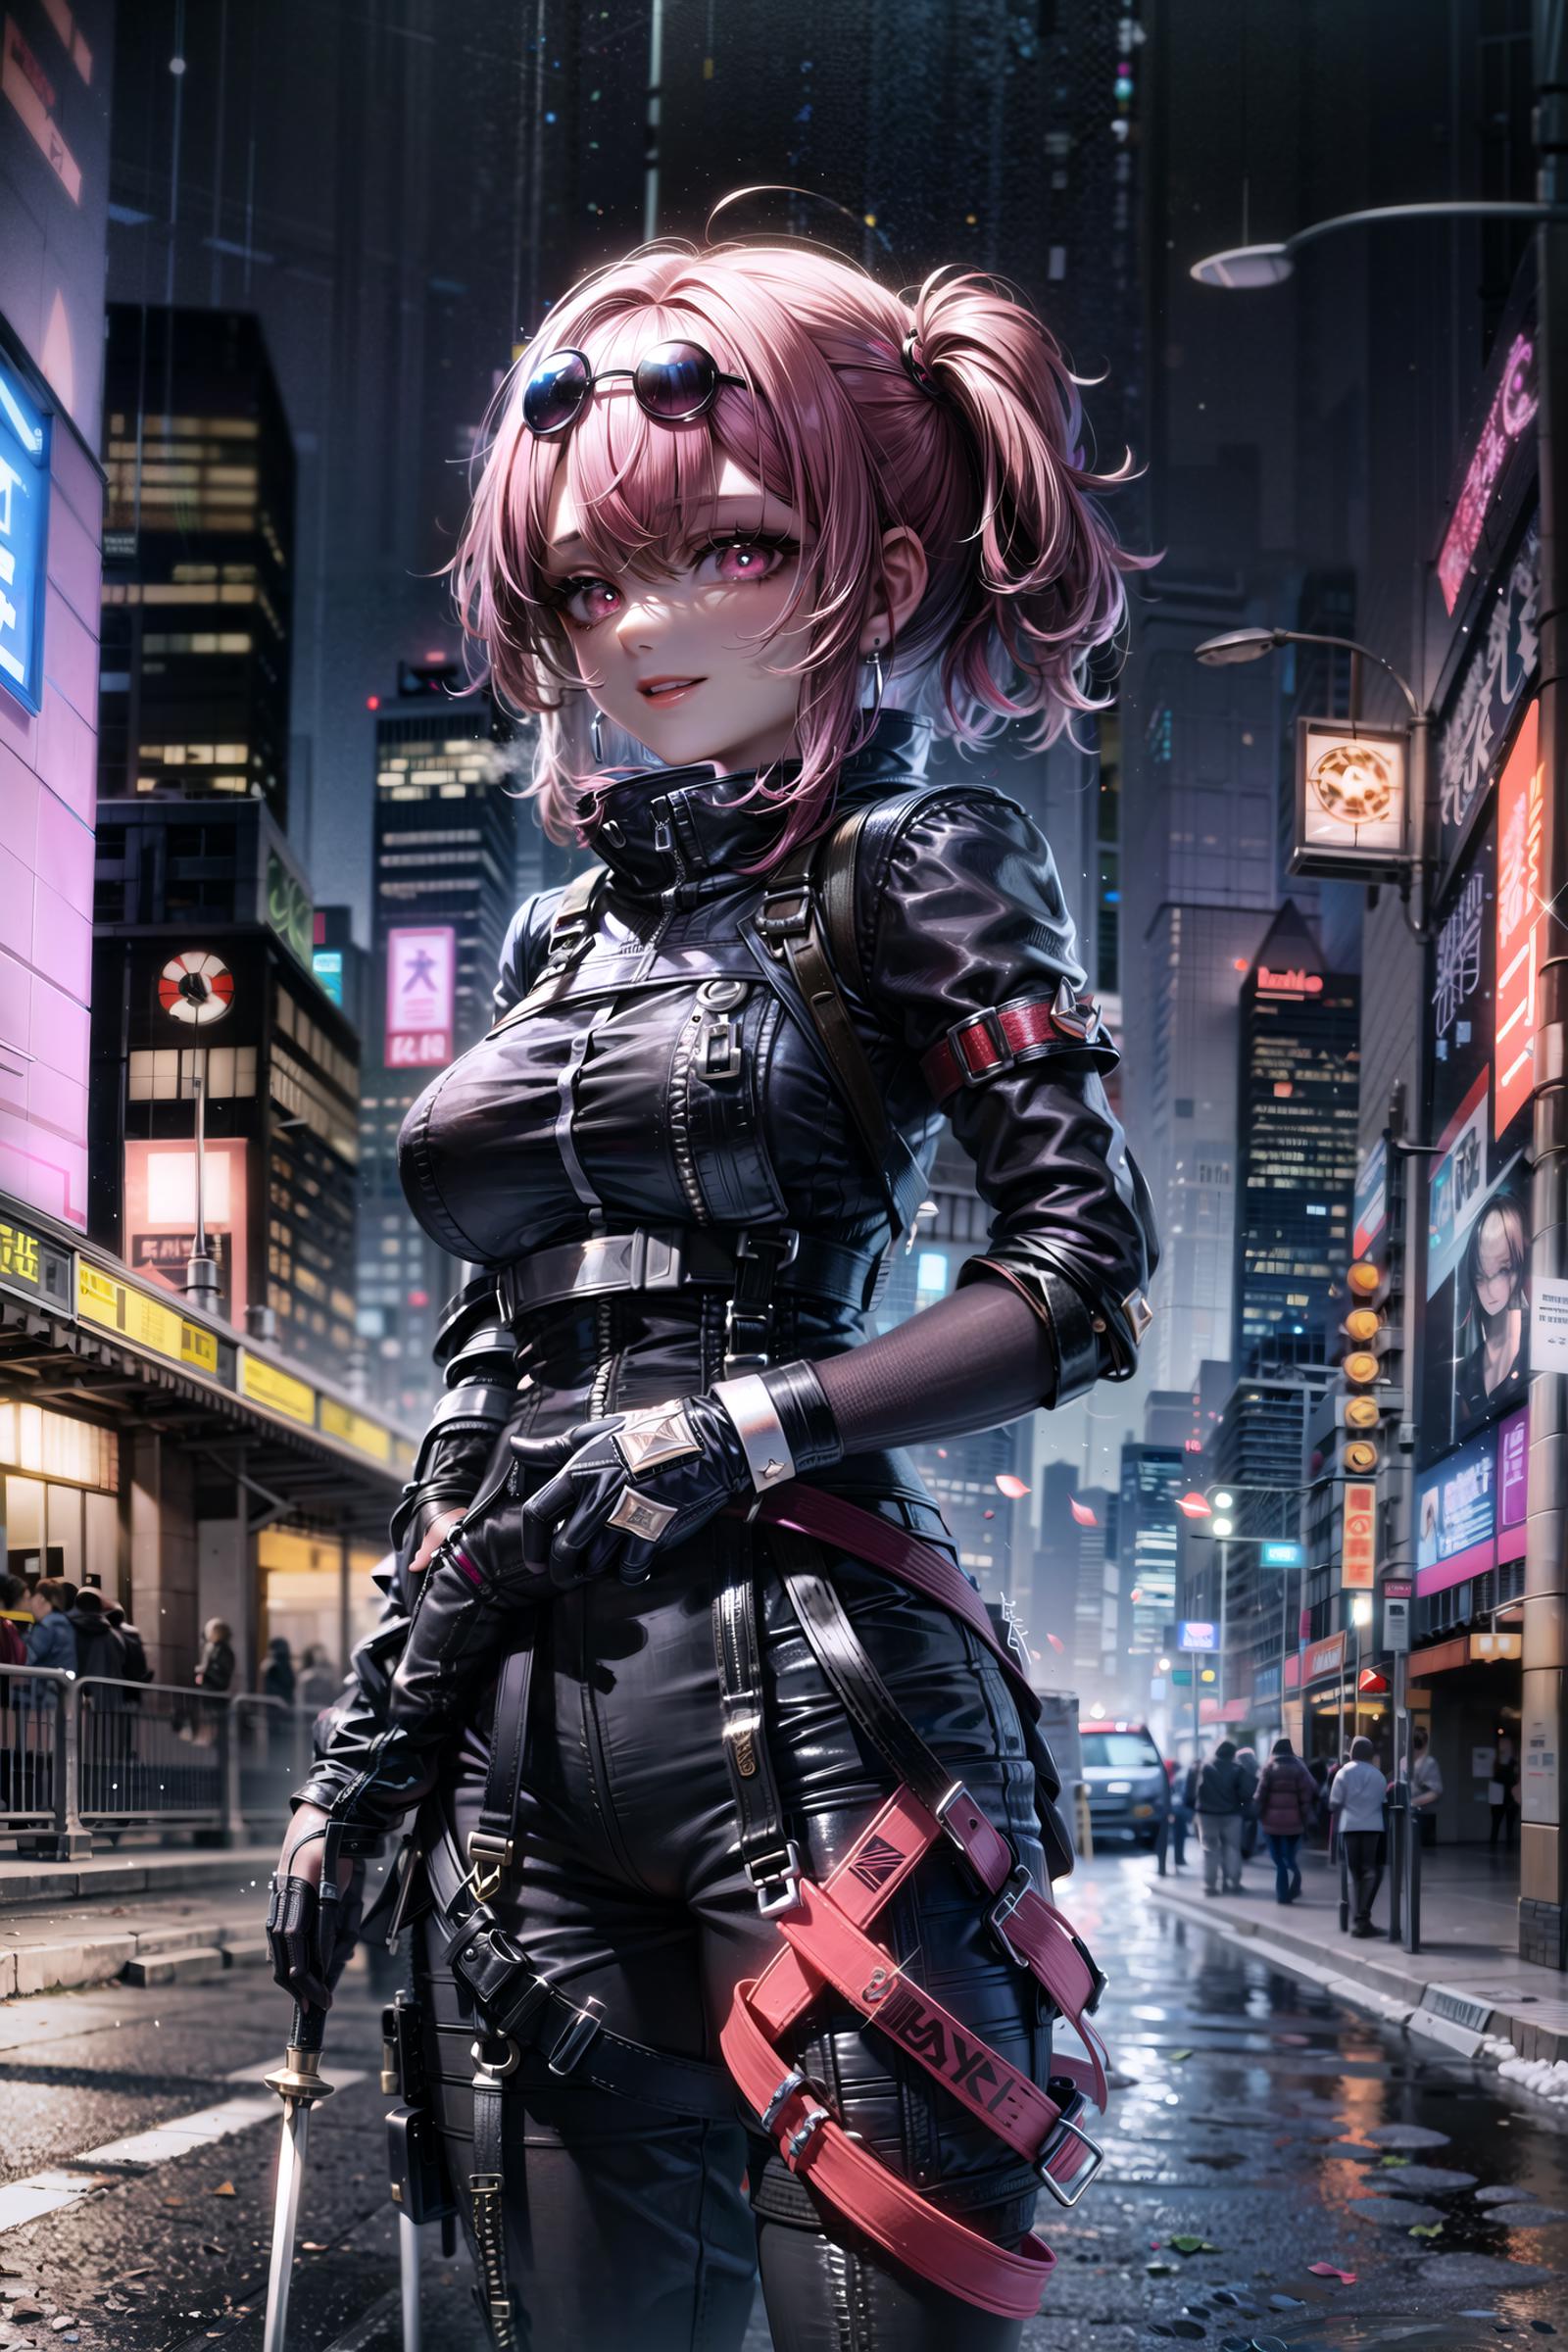 A woman wearing black leather and carrying a gun in a futuristic city.